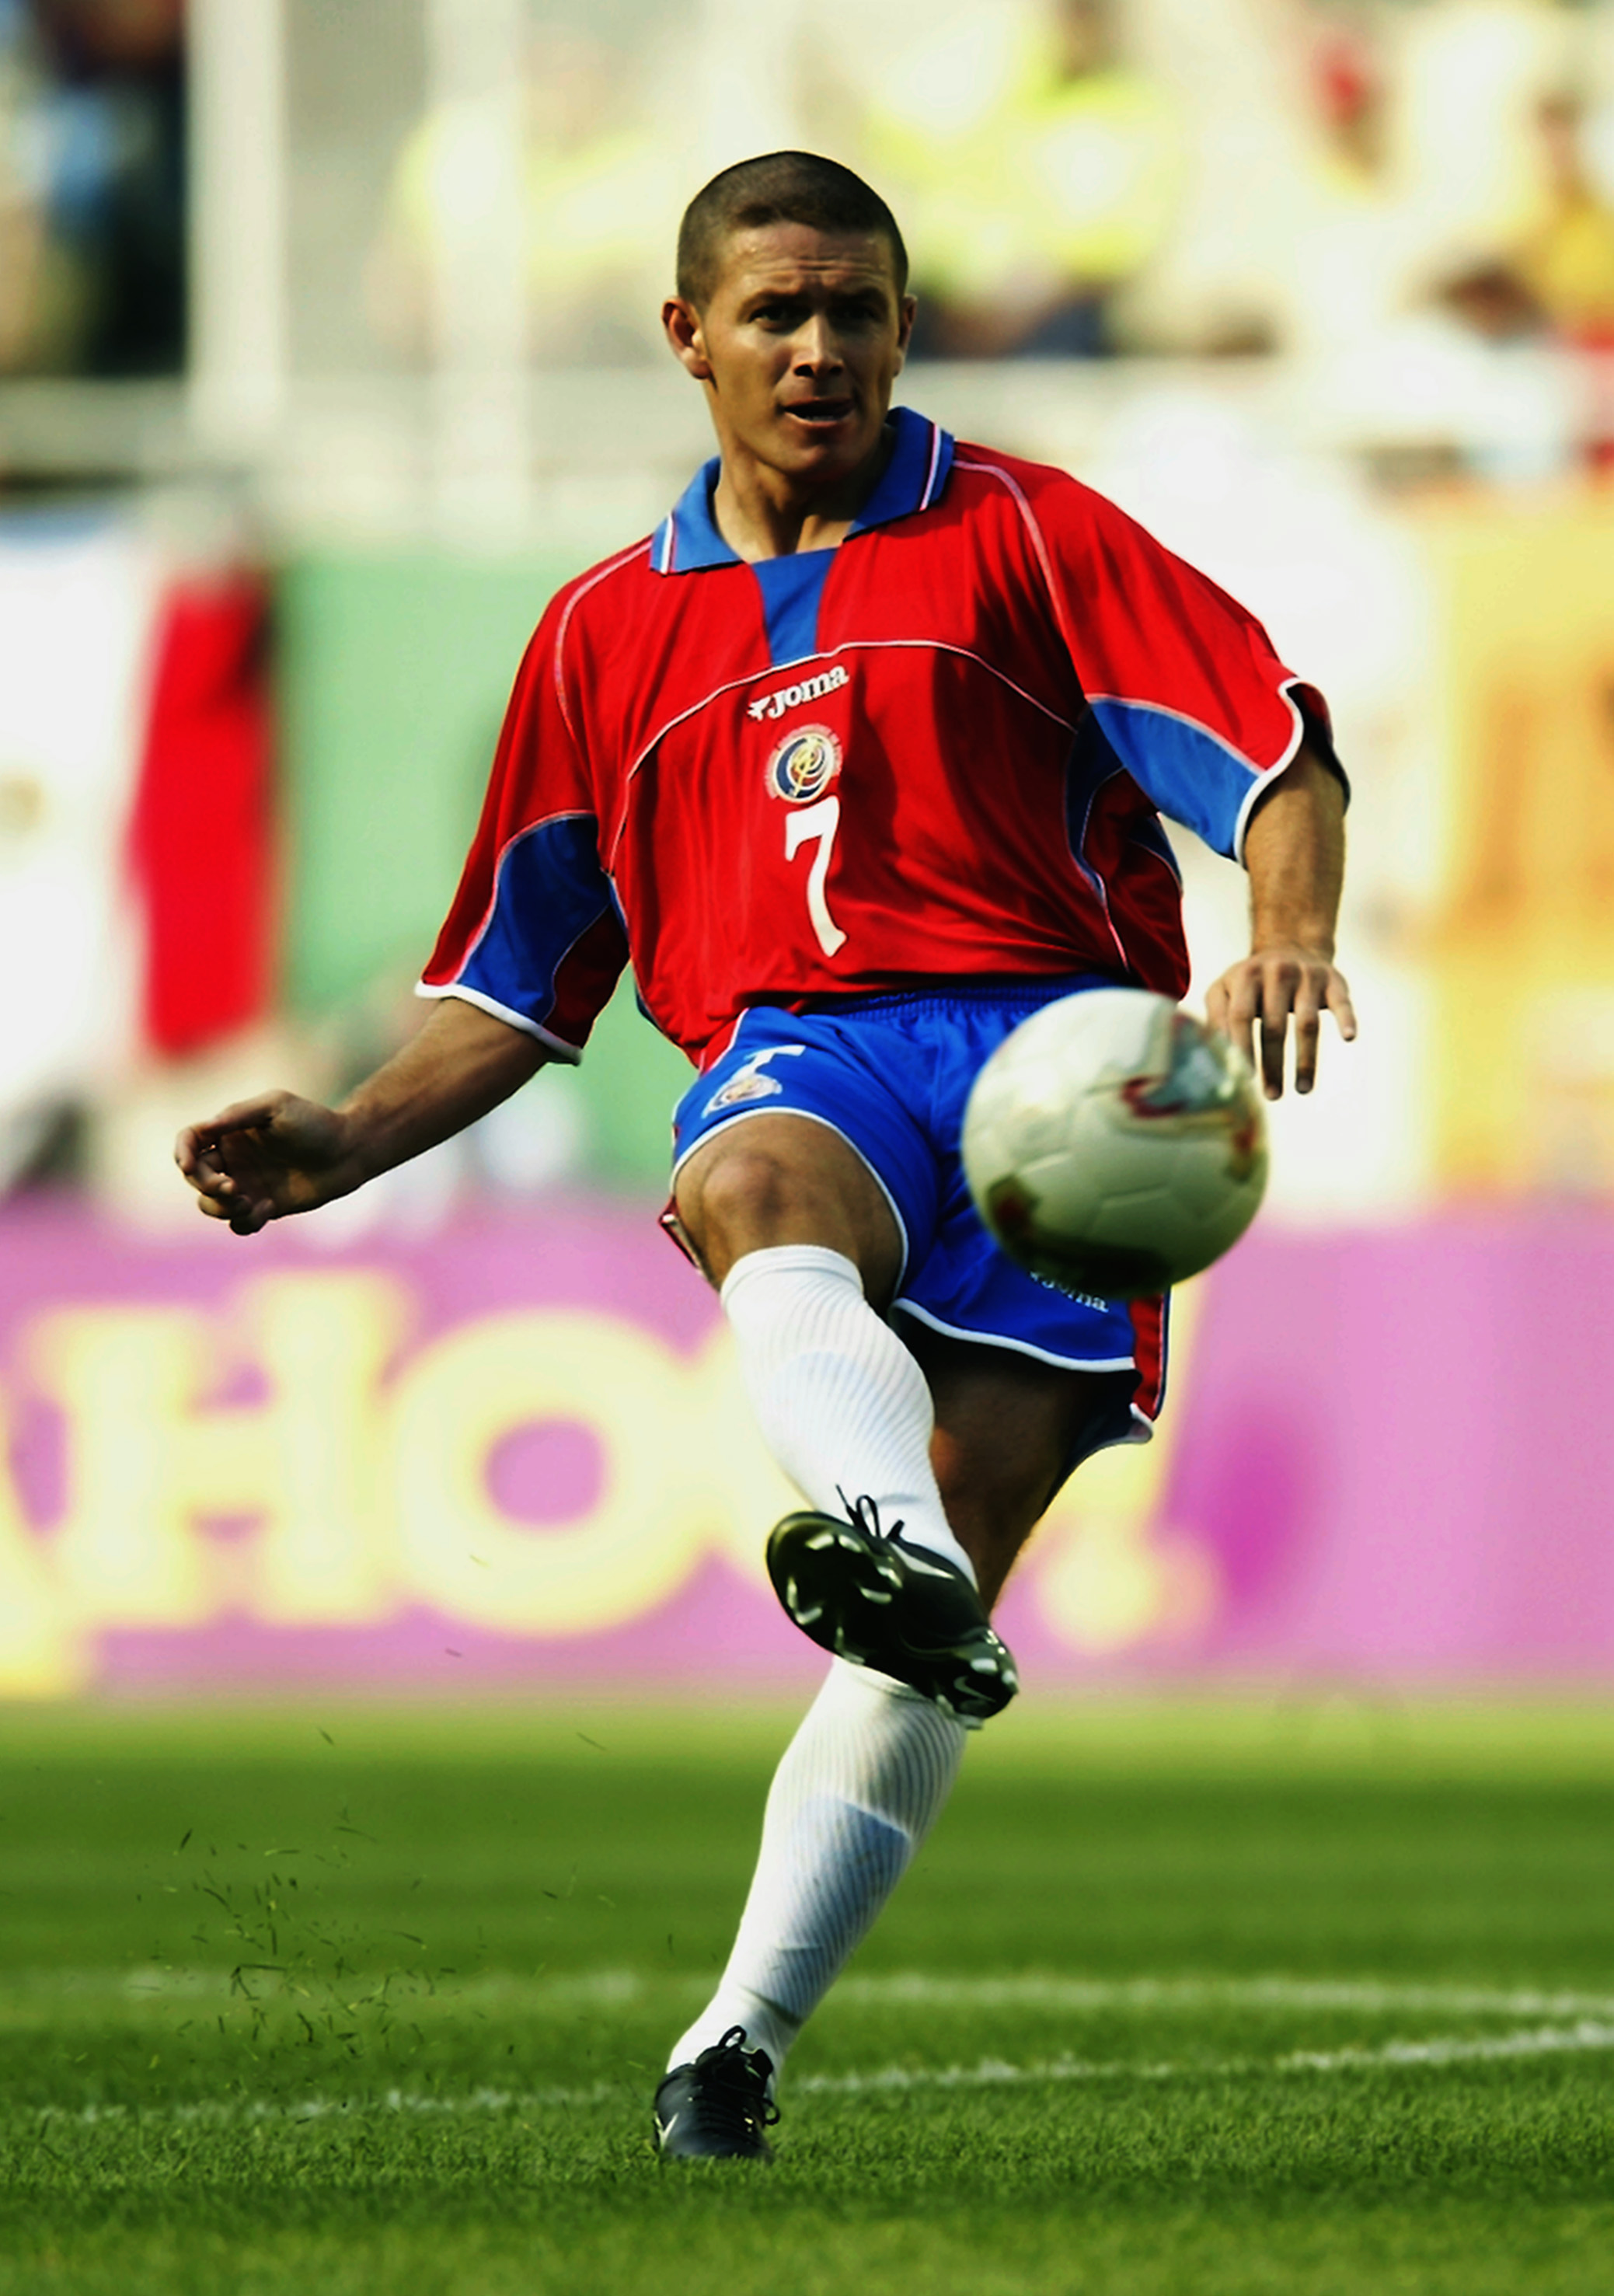 SUWON - JUNE 13:  Rolando Fonseca of Costa Rica in action during the Group C match against Brazil of the World Cup Group Stage  played at the Suwon World Cup Stadium, Suwon, South Korea on June 13, 2002.  Brazil won the match 5-2. (Photo by Brian Bahr/Get